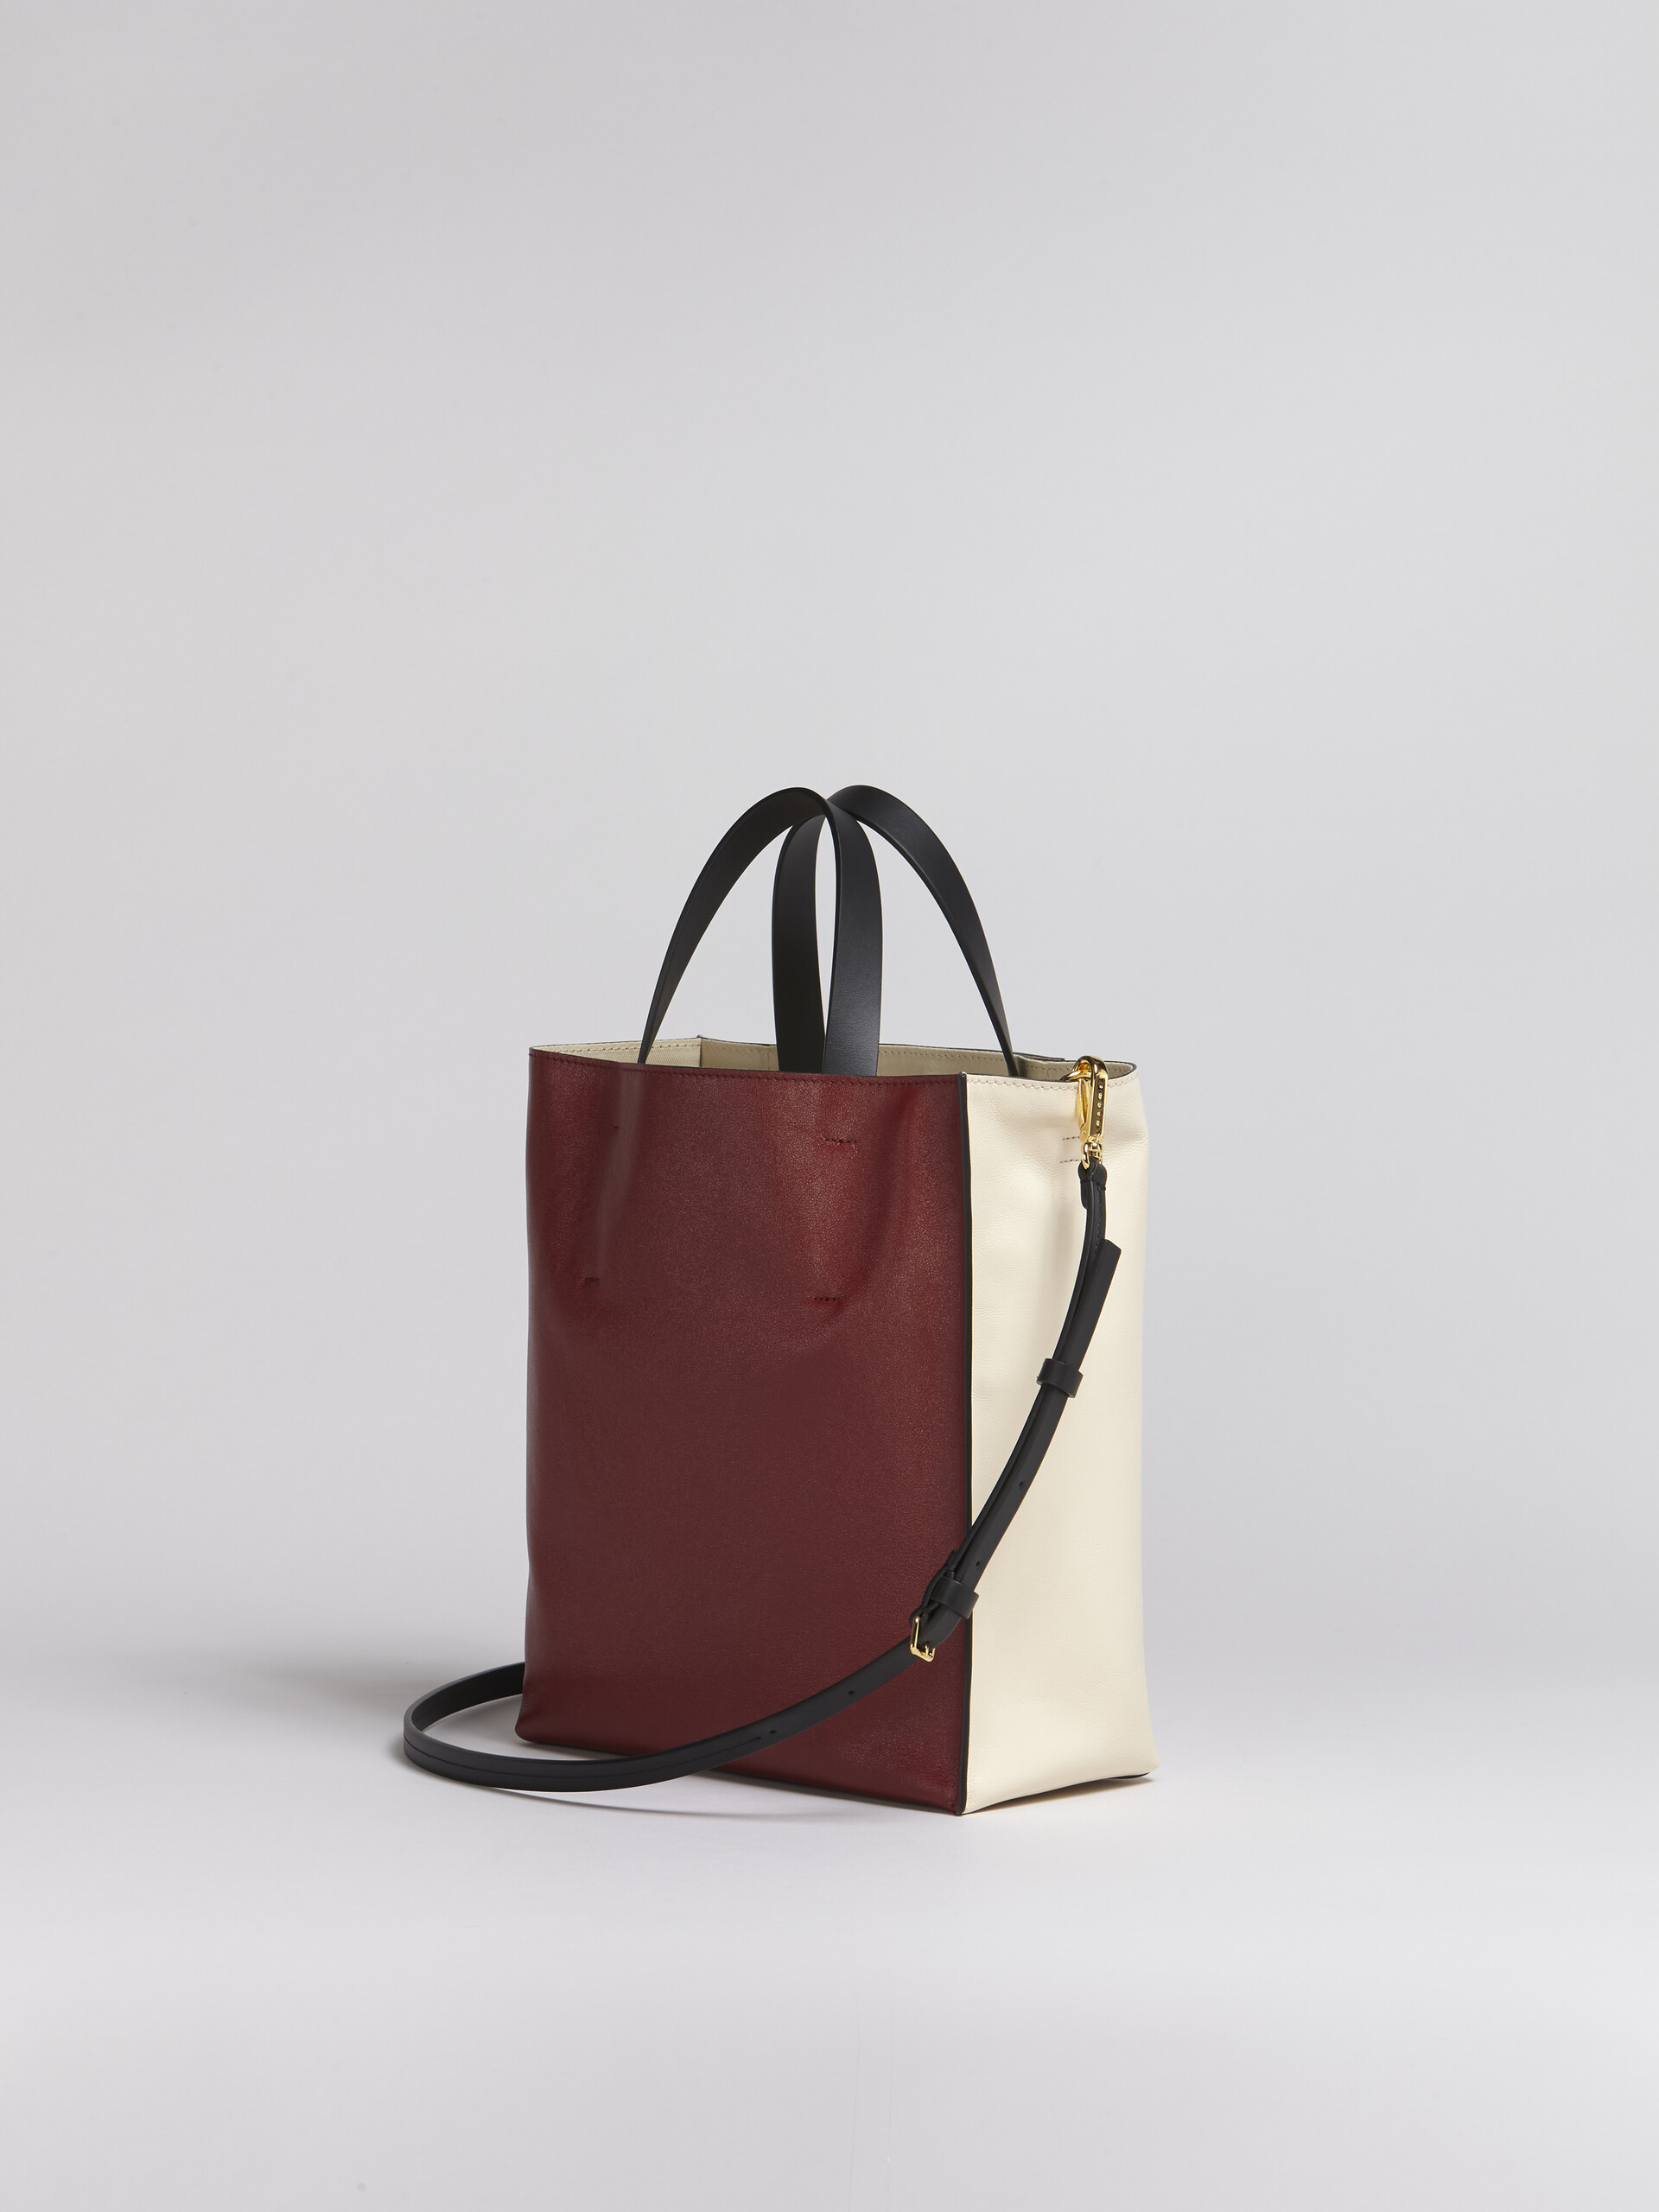 MUSEO SOFT small bag in white and dark red leather - Shopping Bags - Image 2